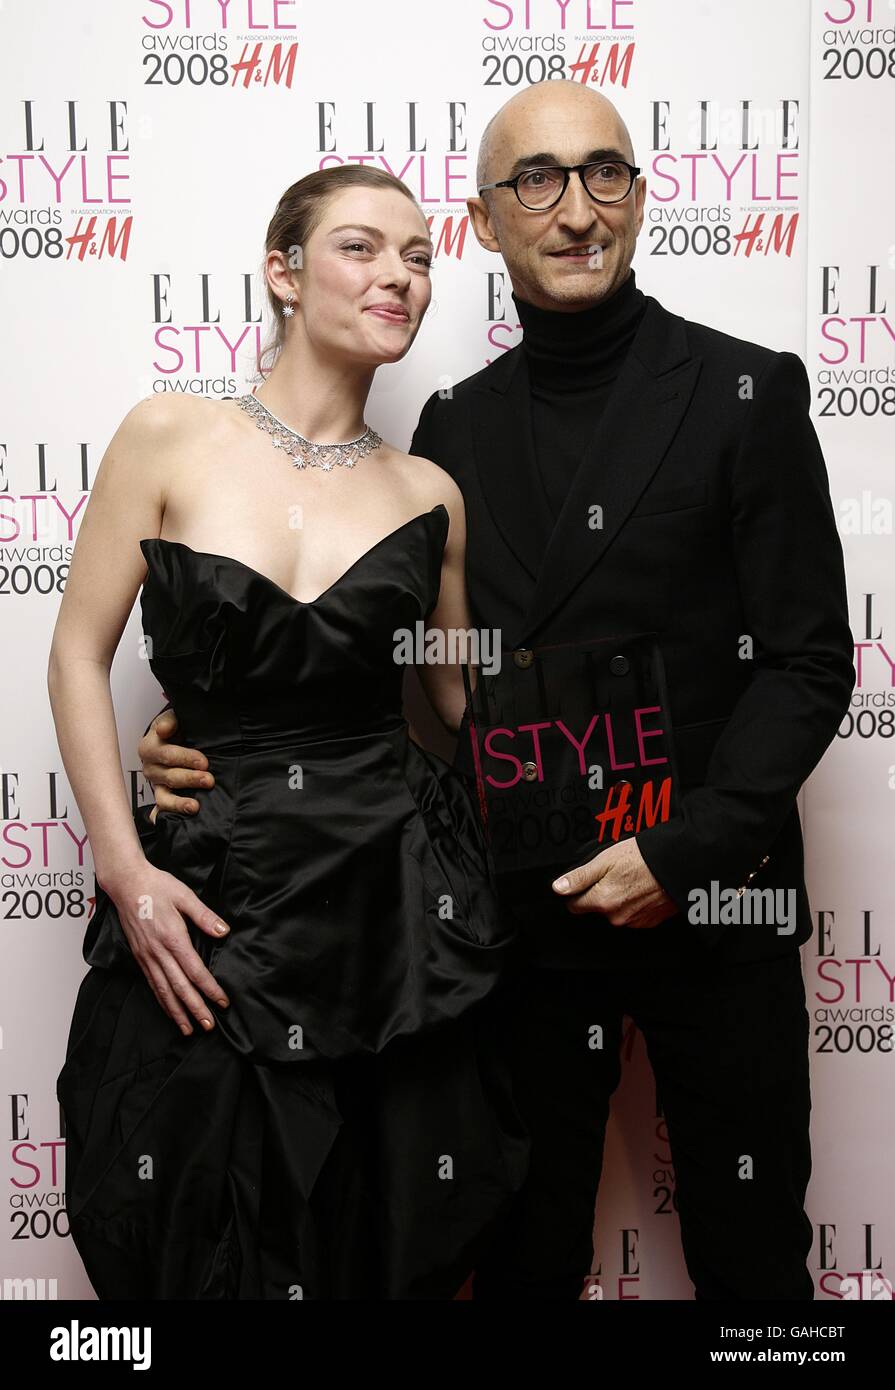 Pierre Hardy with the award for Best Accessory Designer at the ELLE Style Awards 2008, The Westway, off Latimer Road, W10 Stock Photo